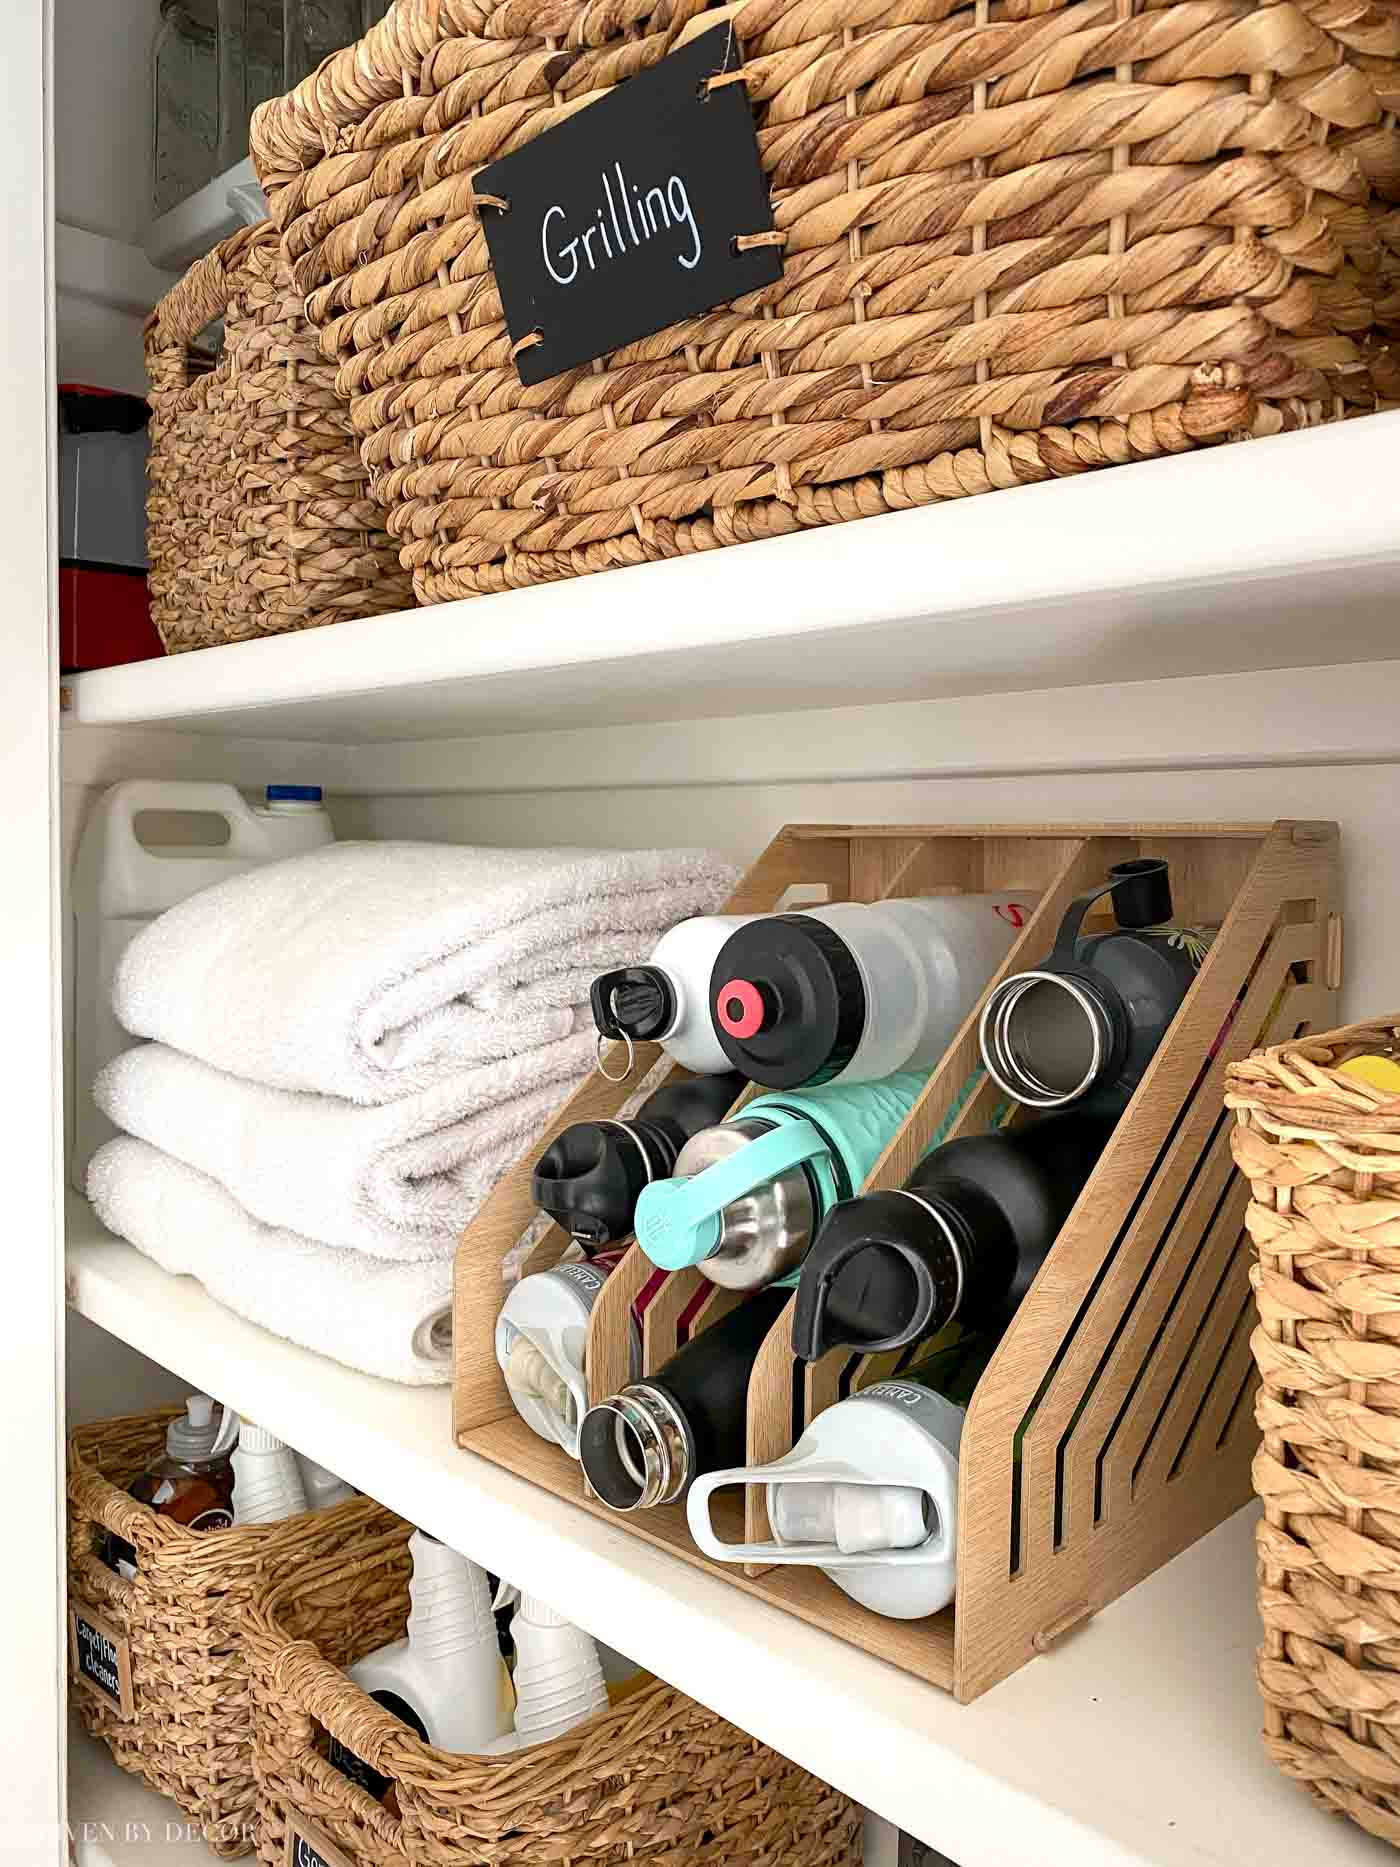 Love this kitchen organization idea for storing water bottles - so smart!